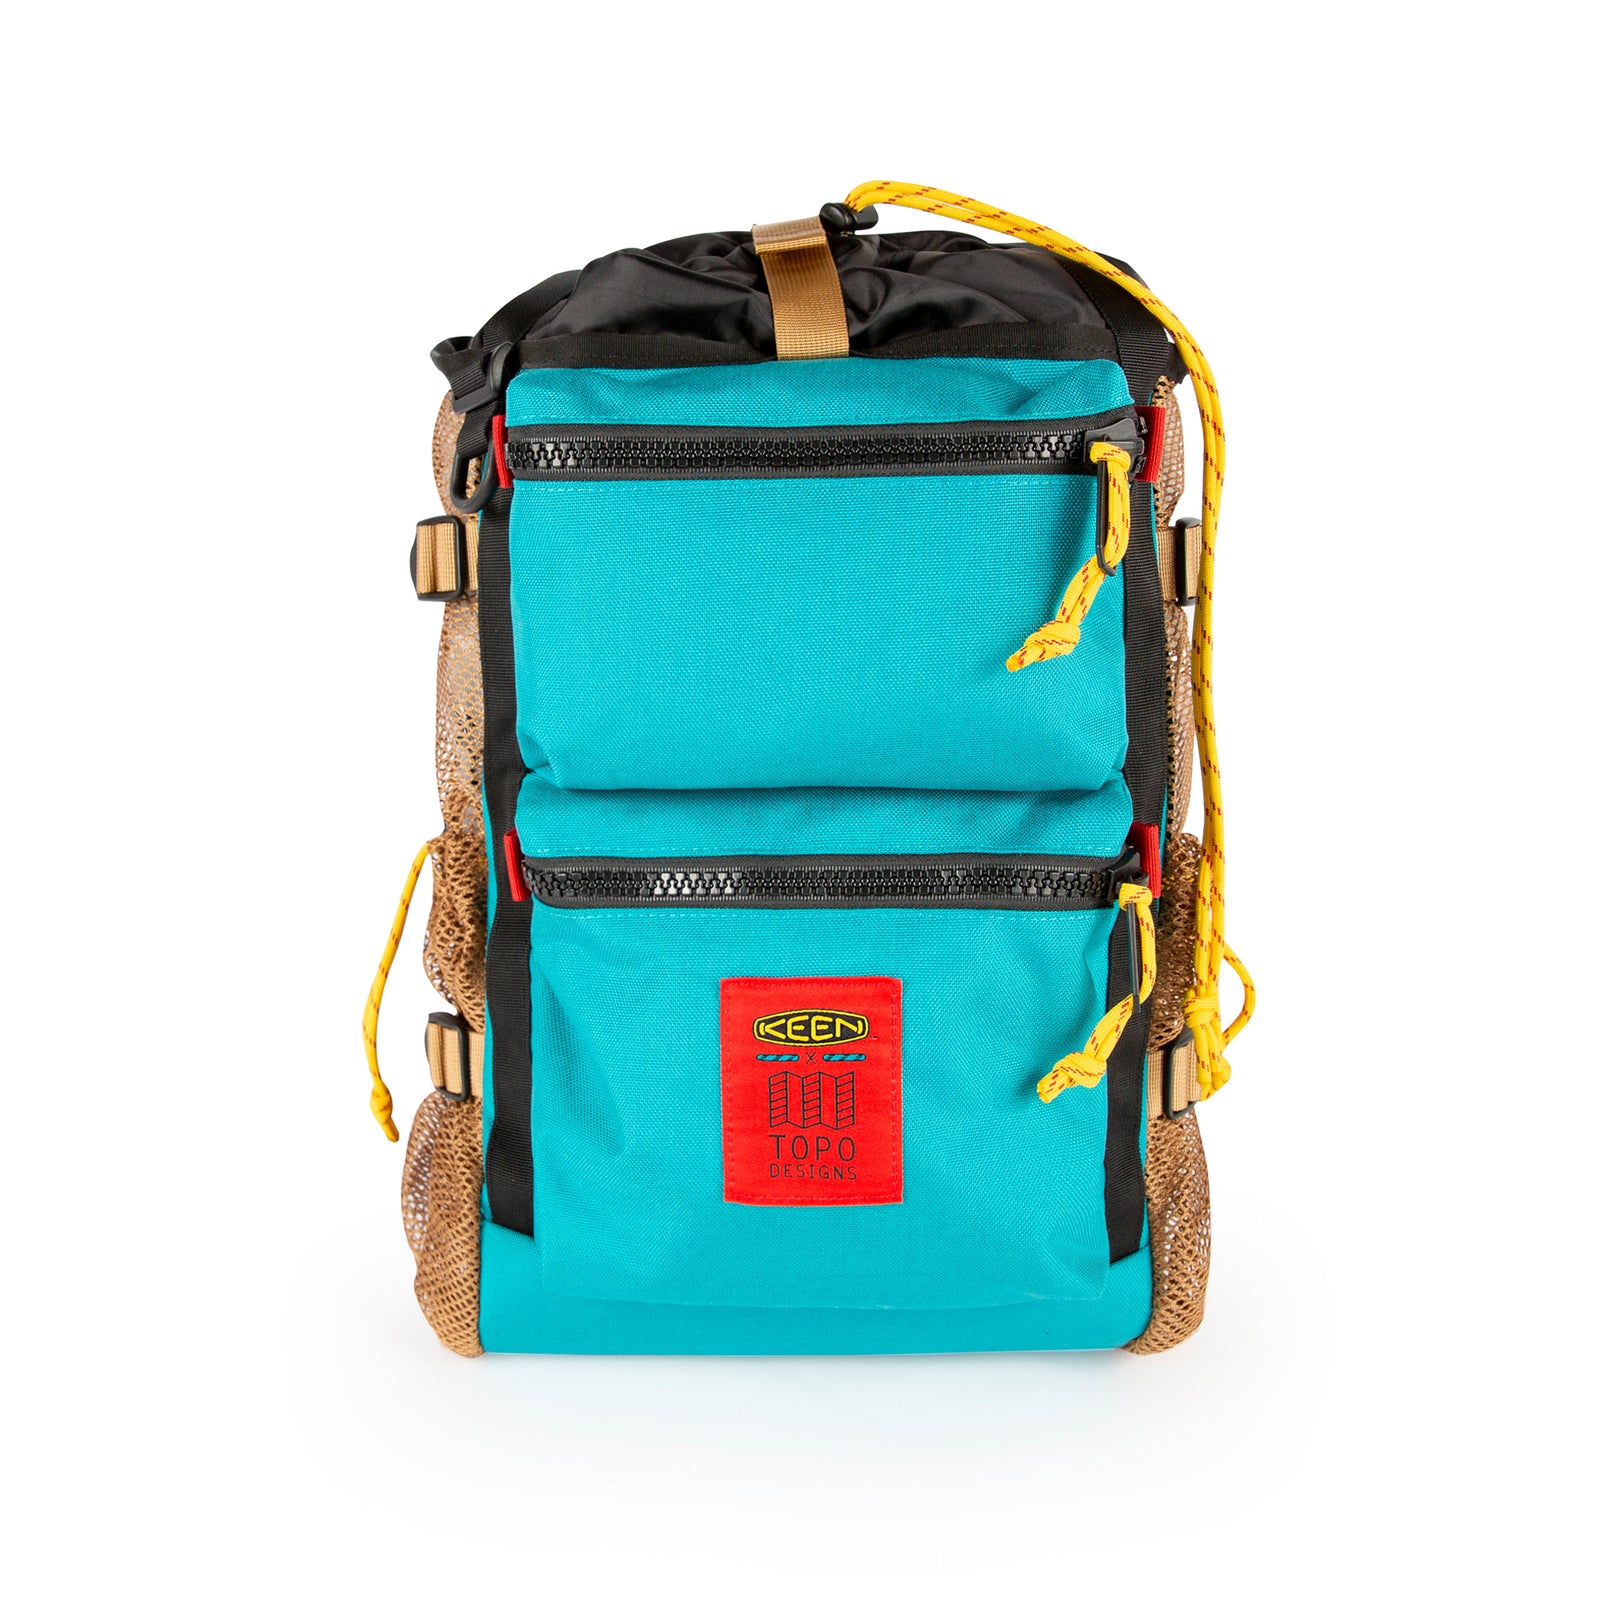 Topo Designs x Keen River Backpack Tote bag in Turquoise